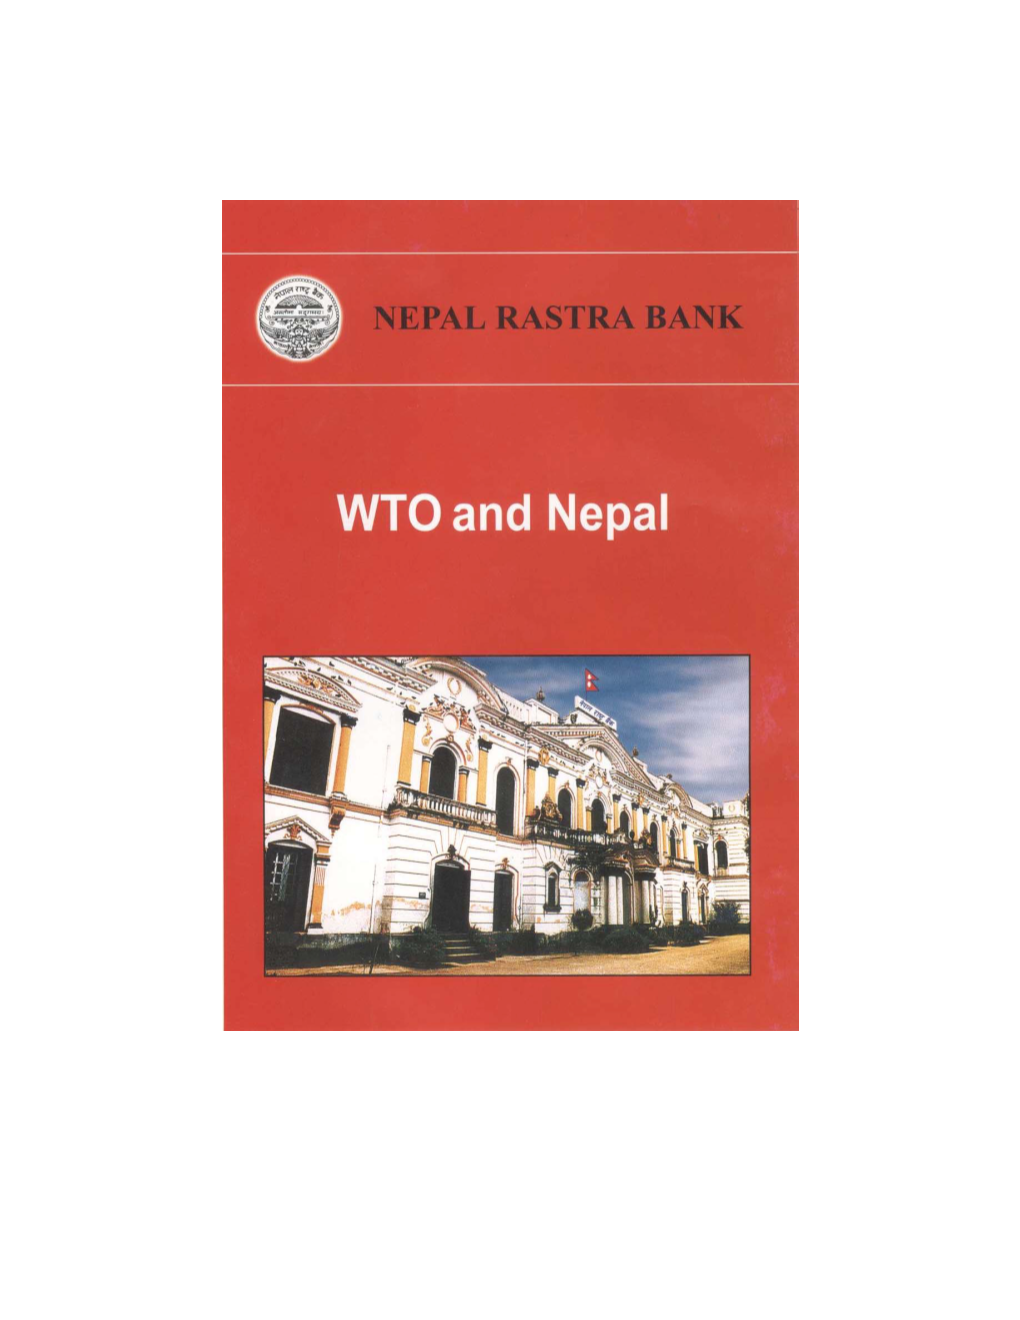 WTO and Nepal (April 2002)